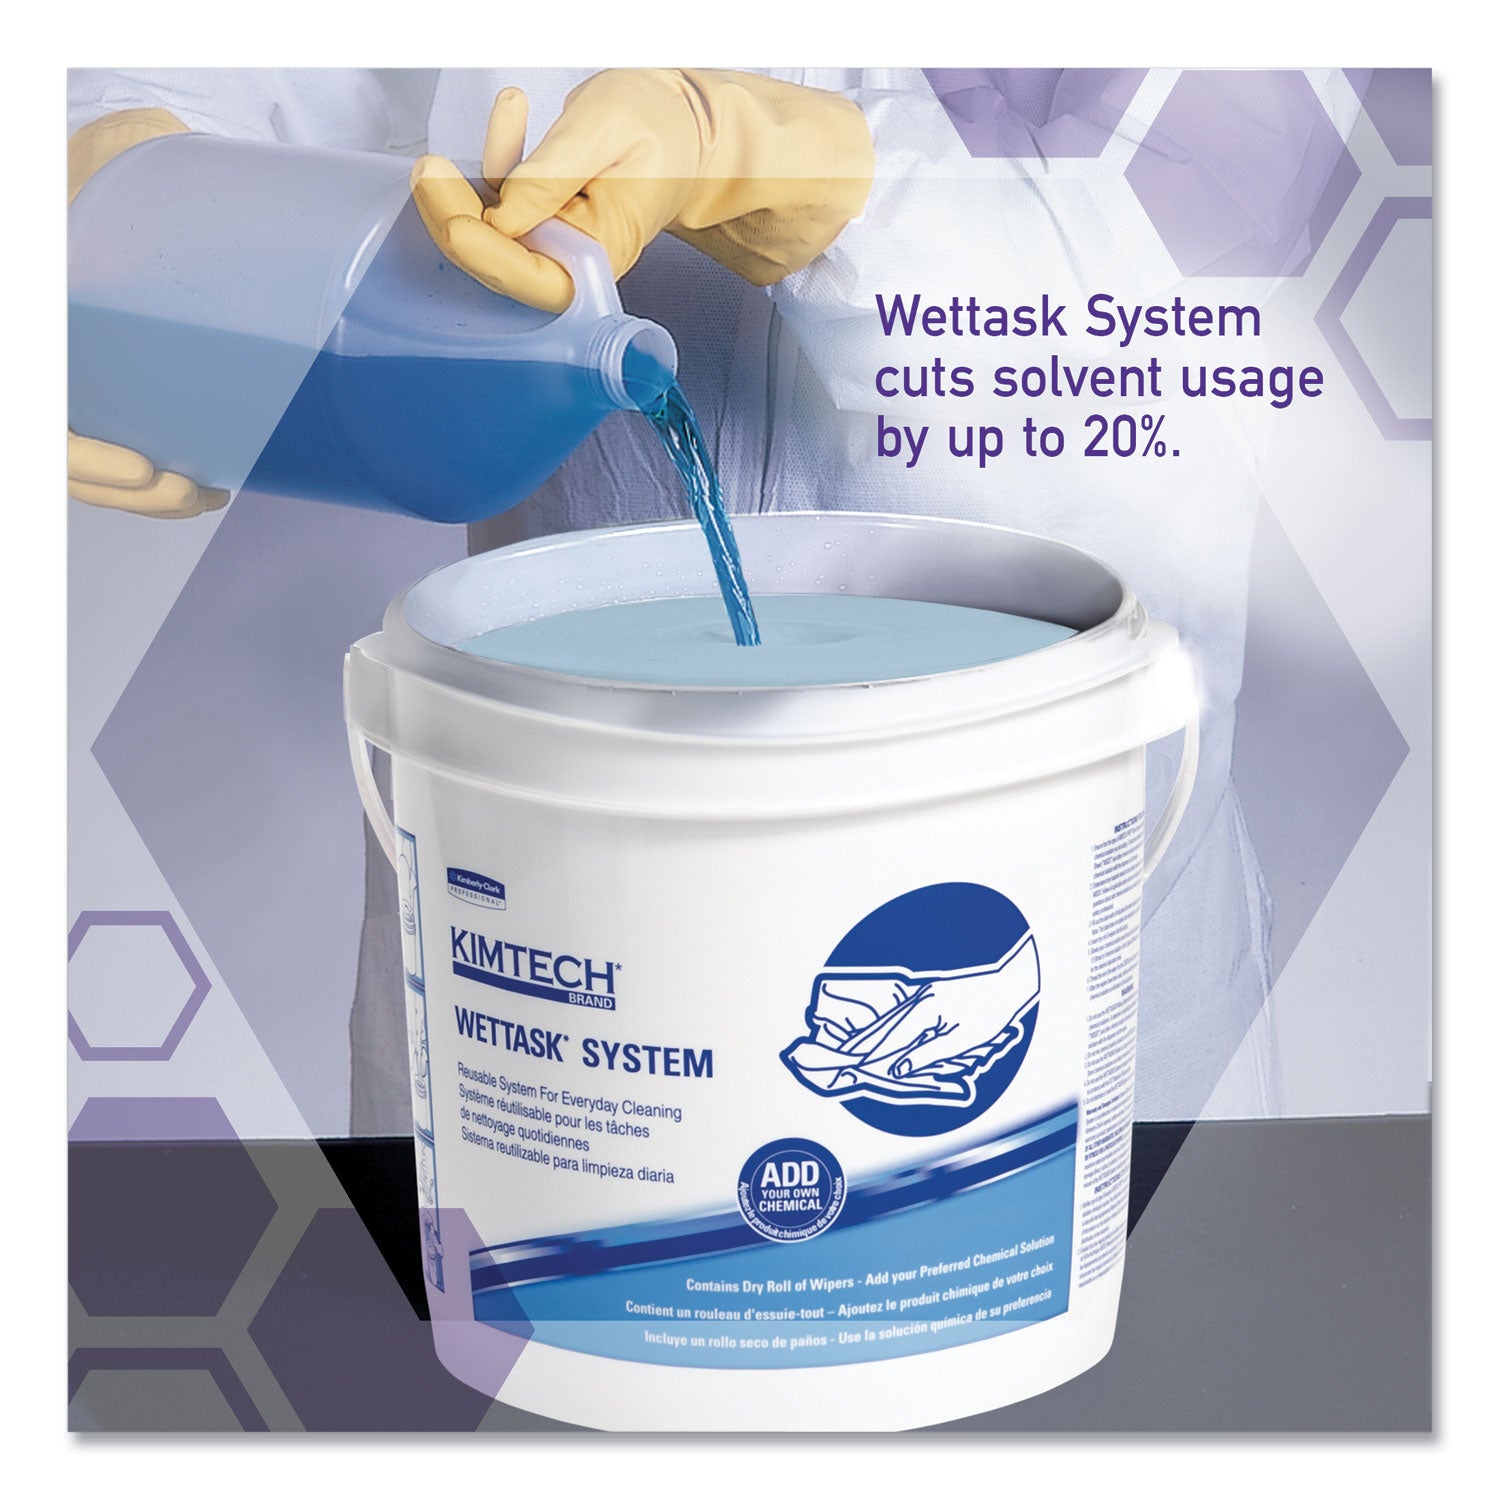 power-clean-wipers-for-disinfectants-sanitizerssolvents-wettask-customizable-wet-wipe-system-140-roll-6-rolls-1-bucket-ct_kcc0621102 - 5